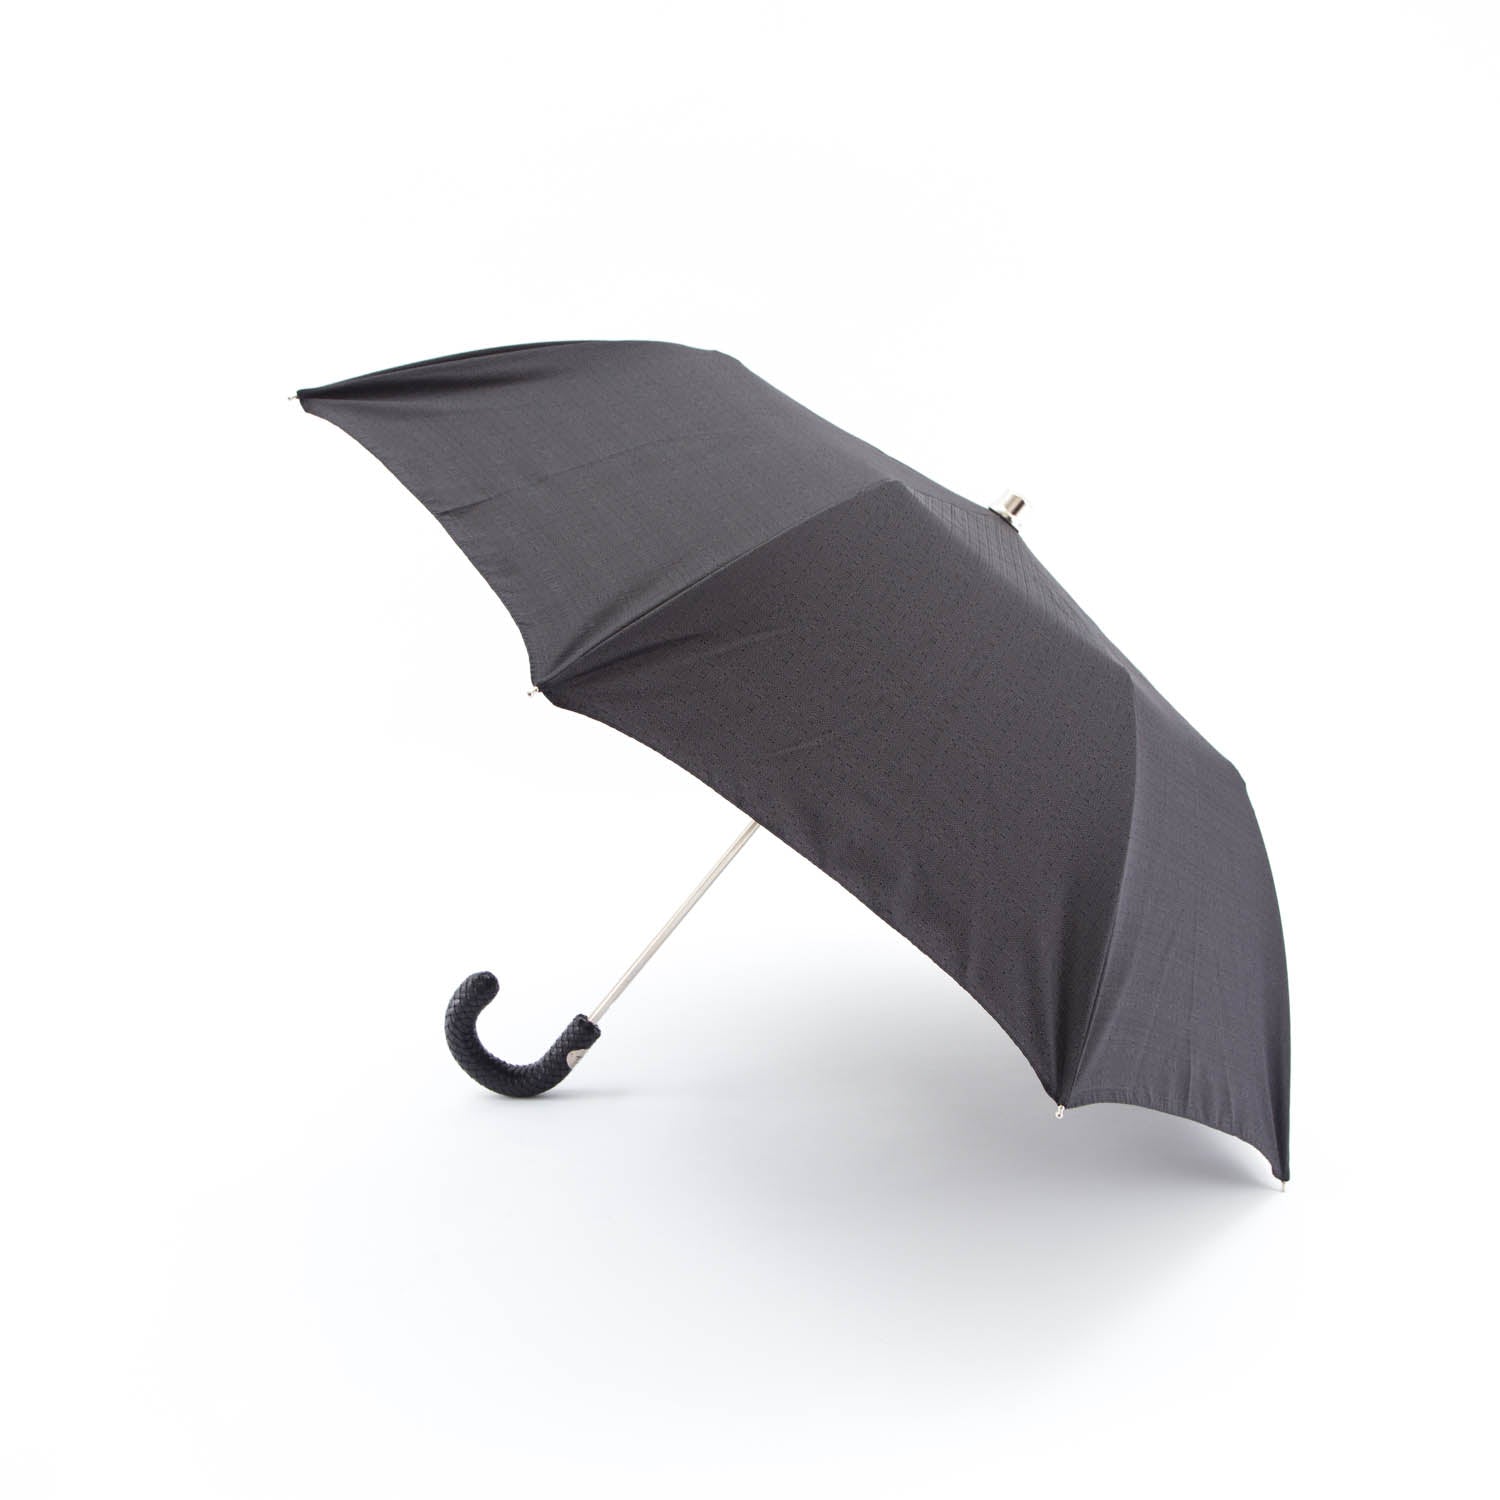 An elegant Imperial Black Travel Umbrella with a woven leather handle on a white background from KirbyAllison.com.